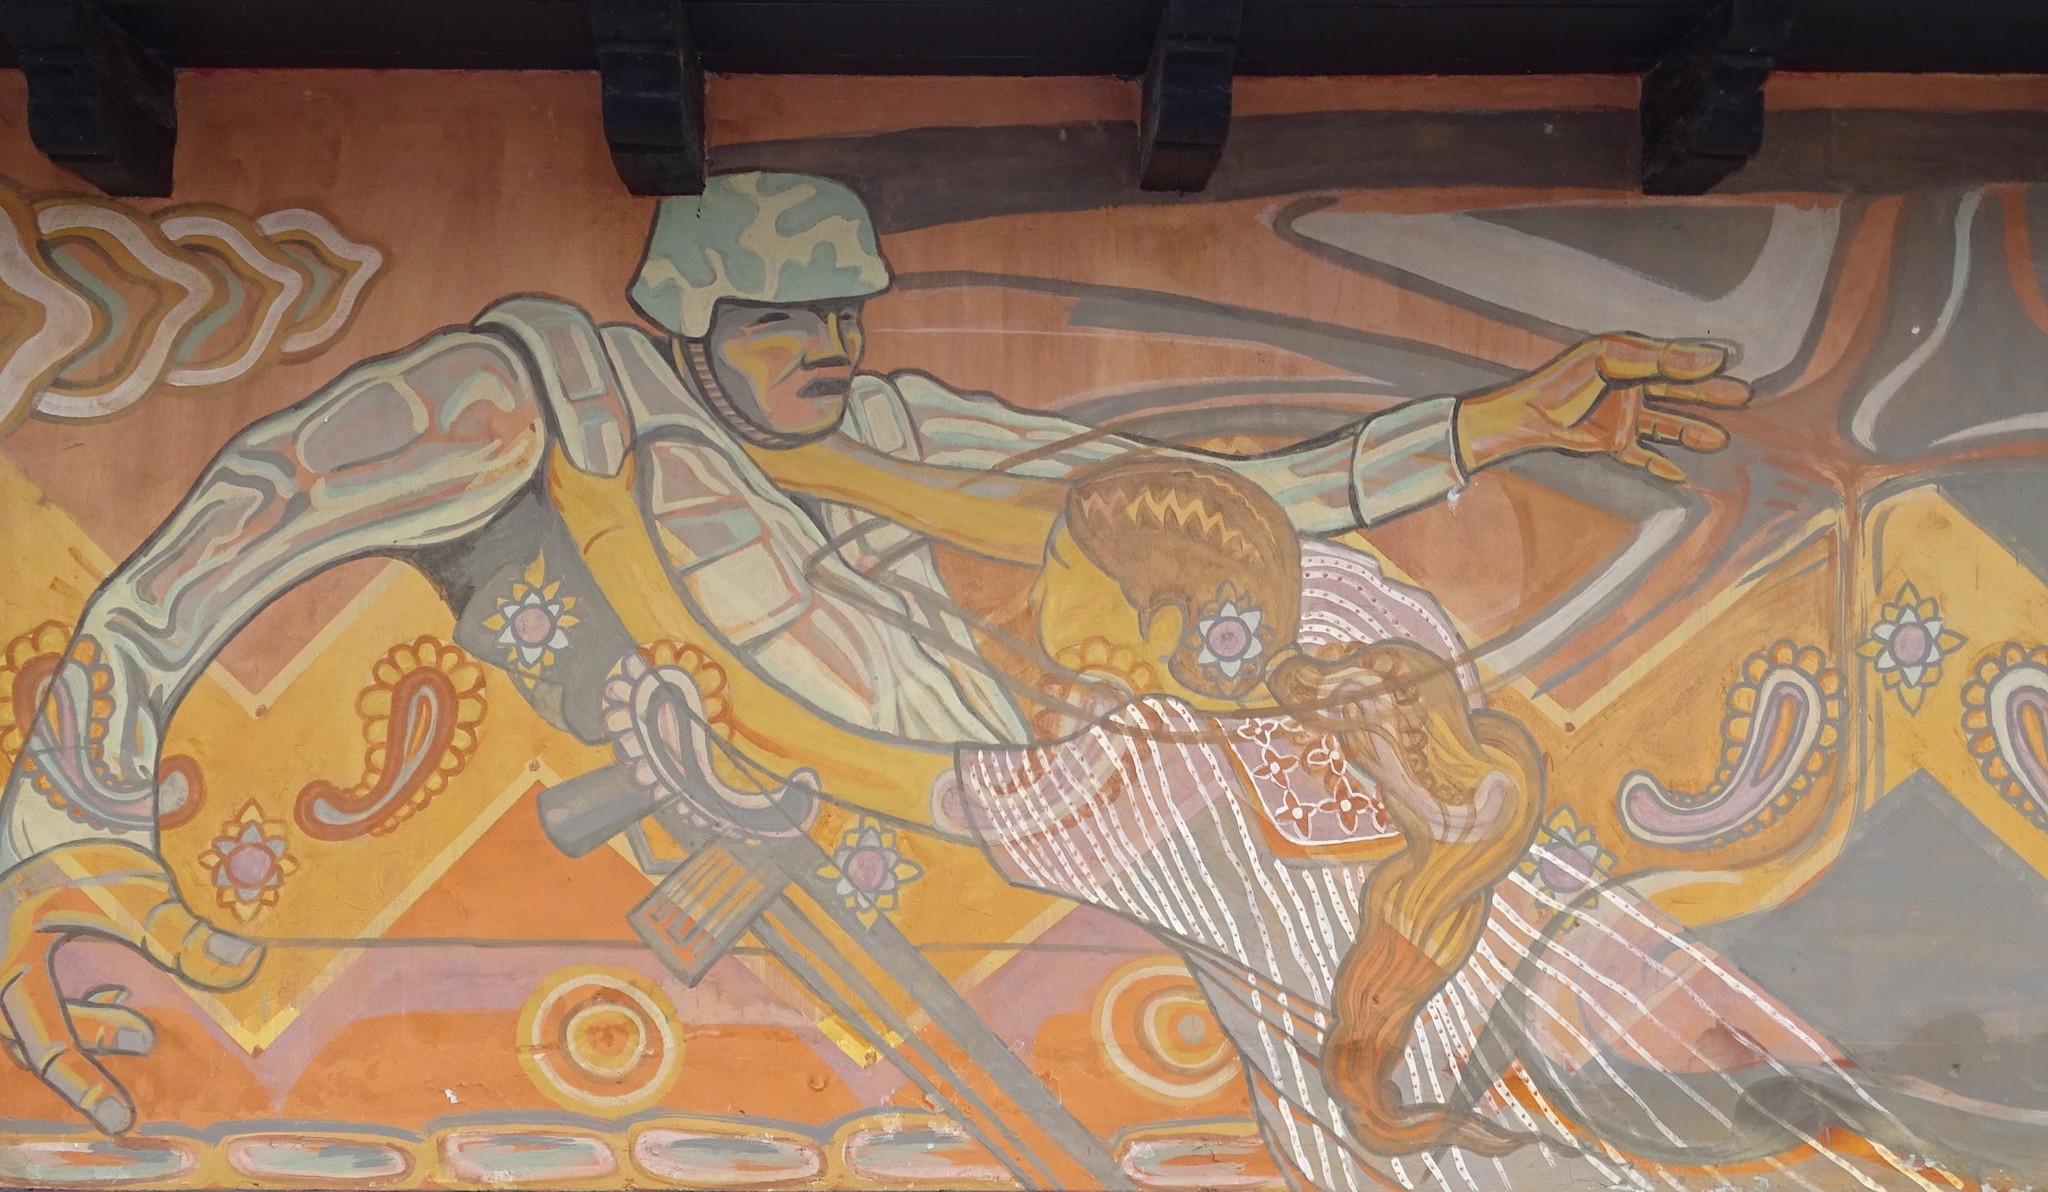 A mural painted onto a wall shows a woman attacking a taller and bigger soldier. The woman is wearing Indigenous Mexican clothing with a long ponytail and a flower in her hair. The soldier is wearing a military uniform and helmet, and has a rifle strapped around his soldier. He seems to be defeated by the woman, with his hands floating as he gets pushed down by her. The mural is made up mostly of oranges, yellows, pinks and grays. Several patterns are painted into the mural.